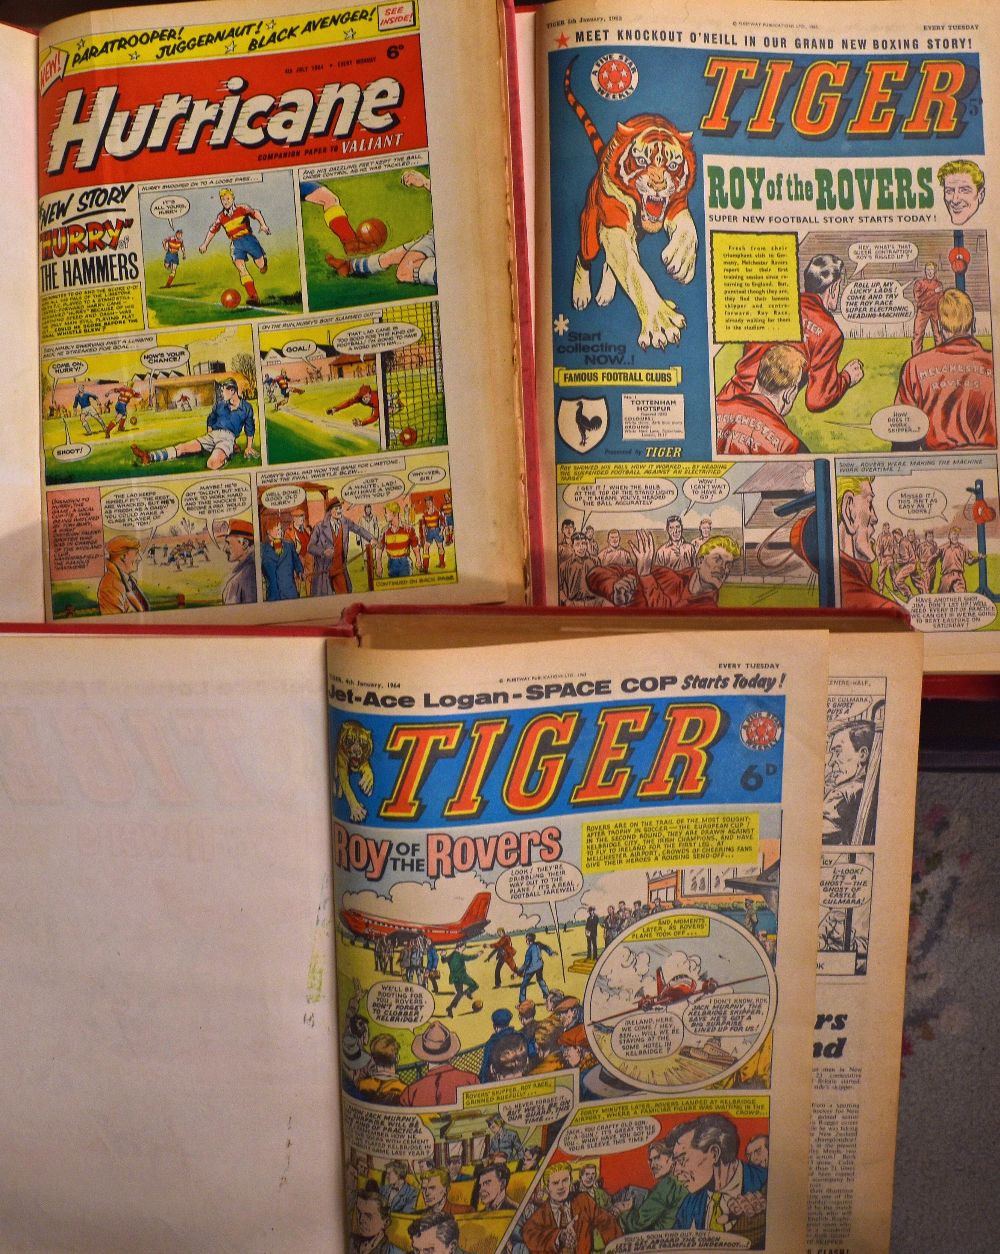 Tiger comics featuring Roy of the Rovers January - December 1963 in 2 red bound volumes), Tiger